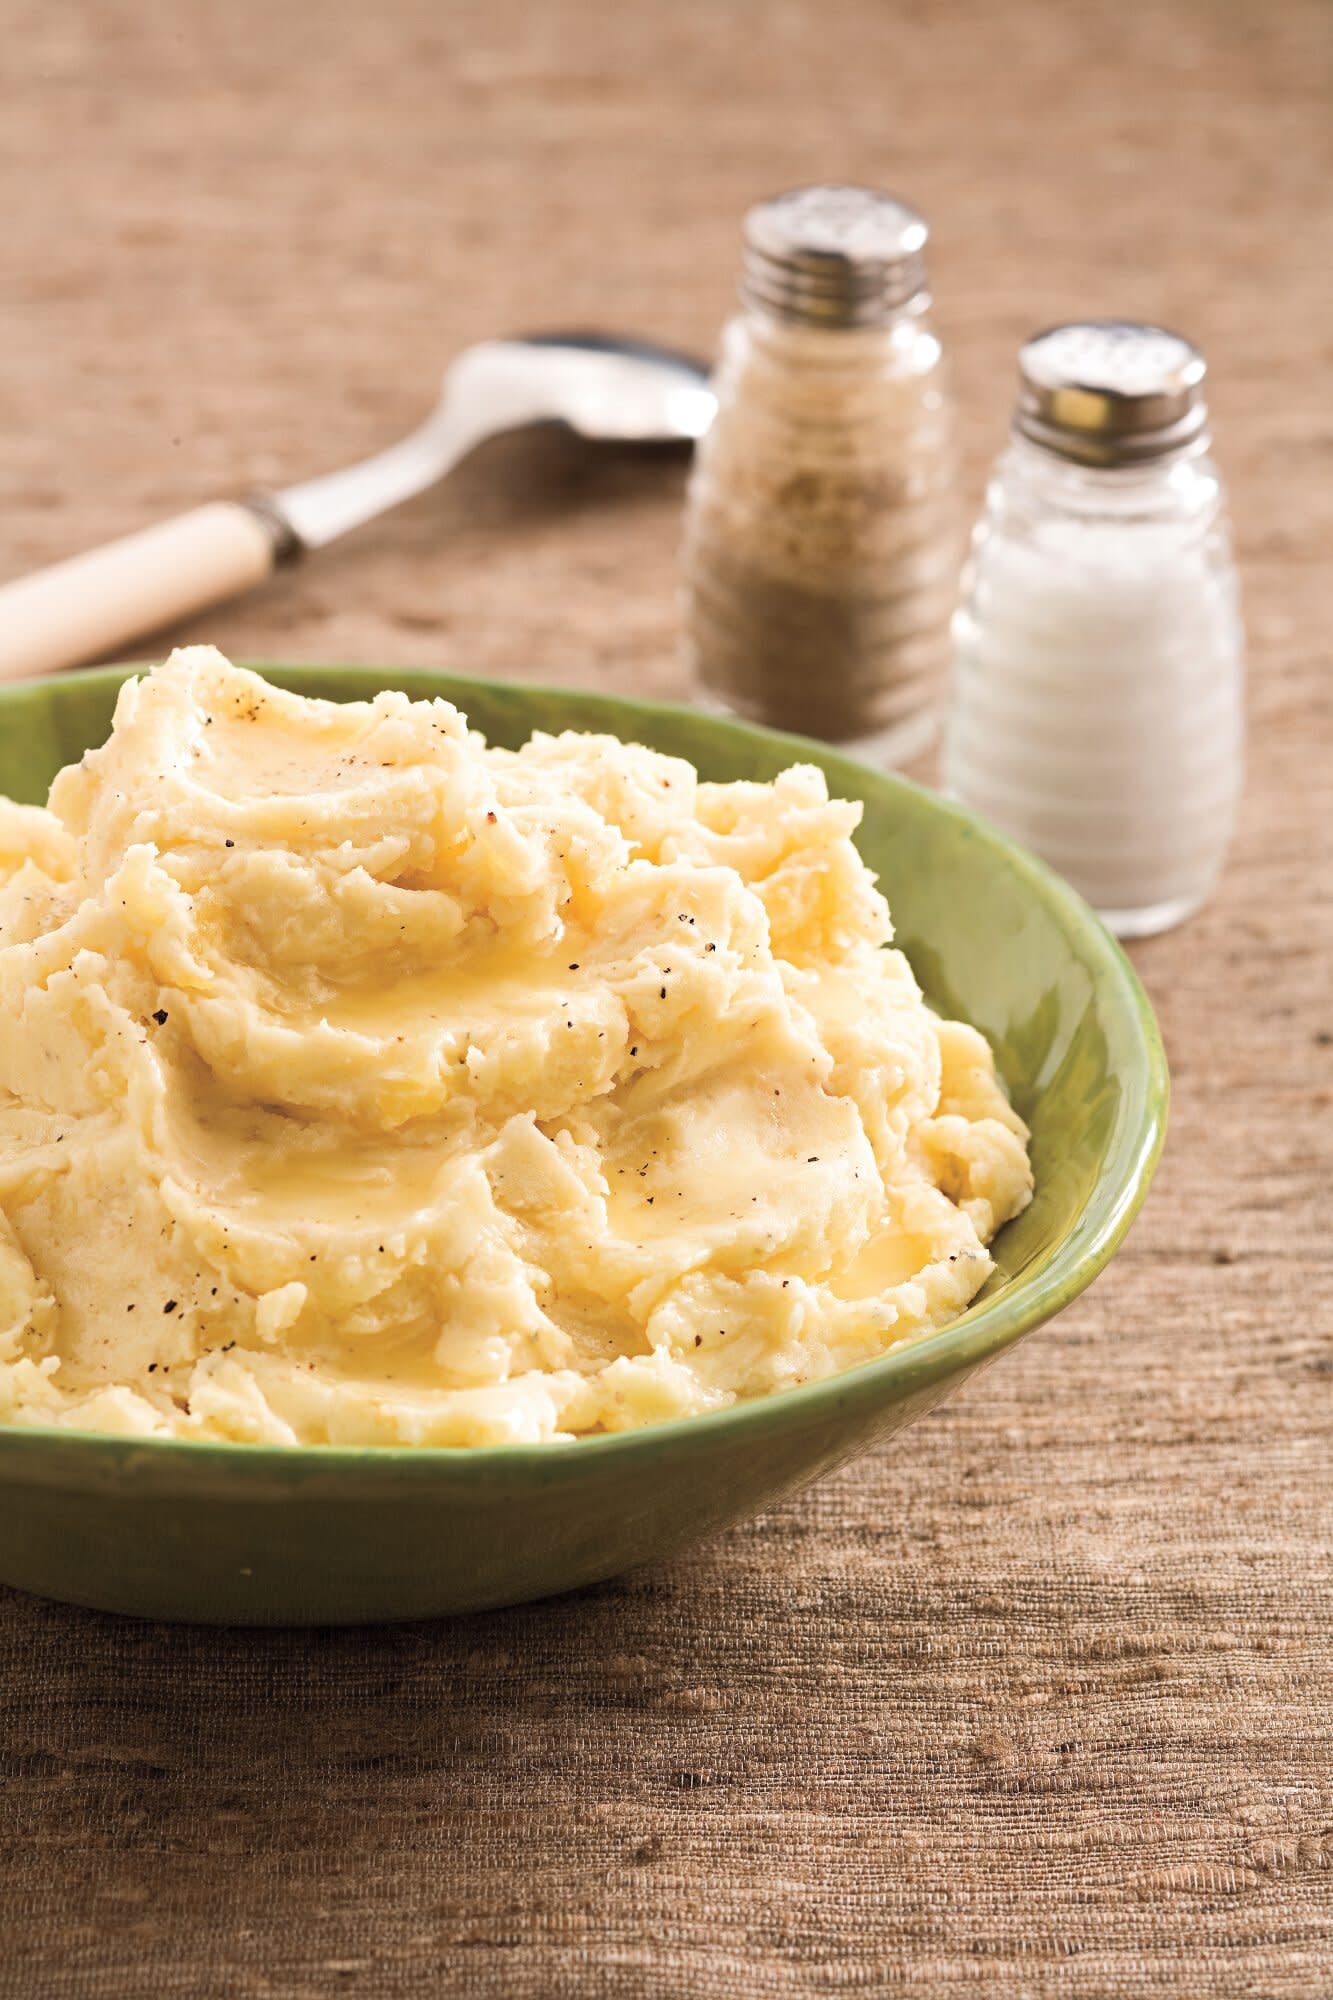 Oops, my mashed potatoes are soupy.  Here’s how to thicken them